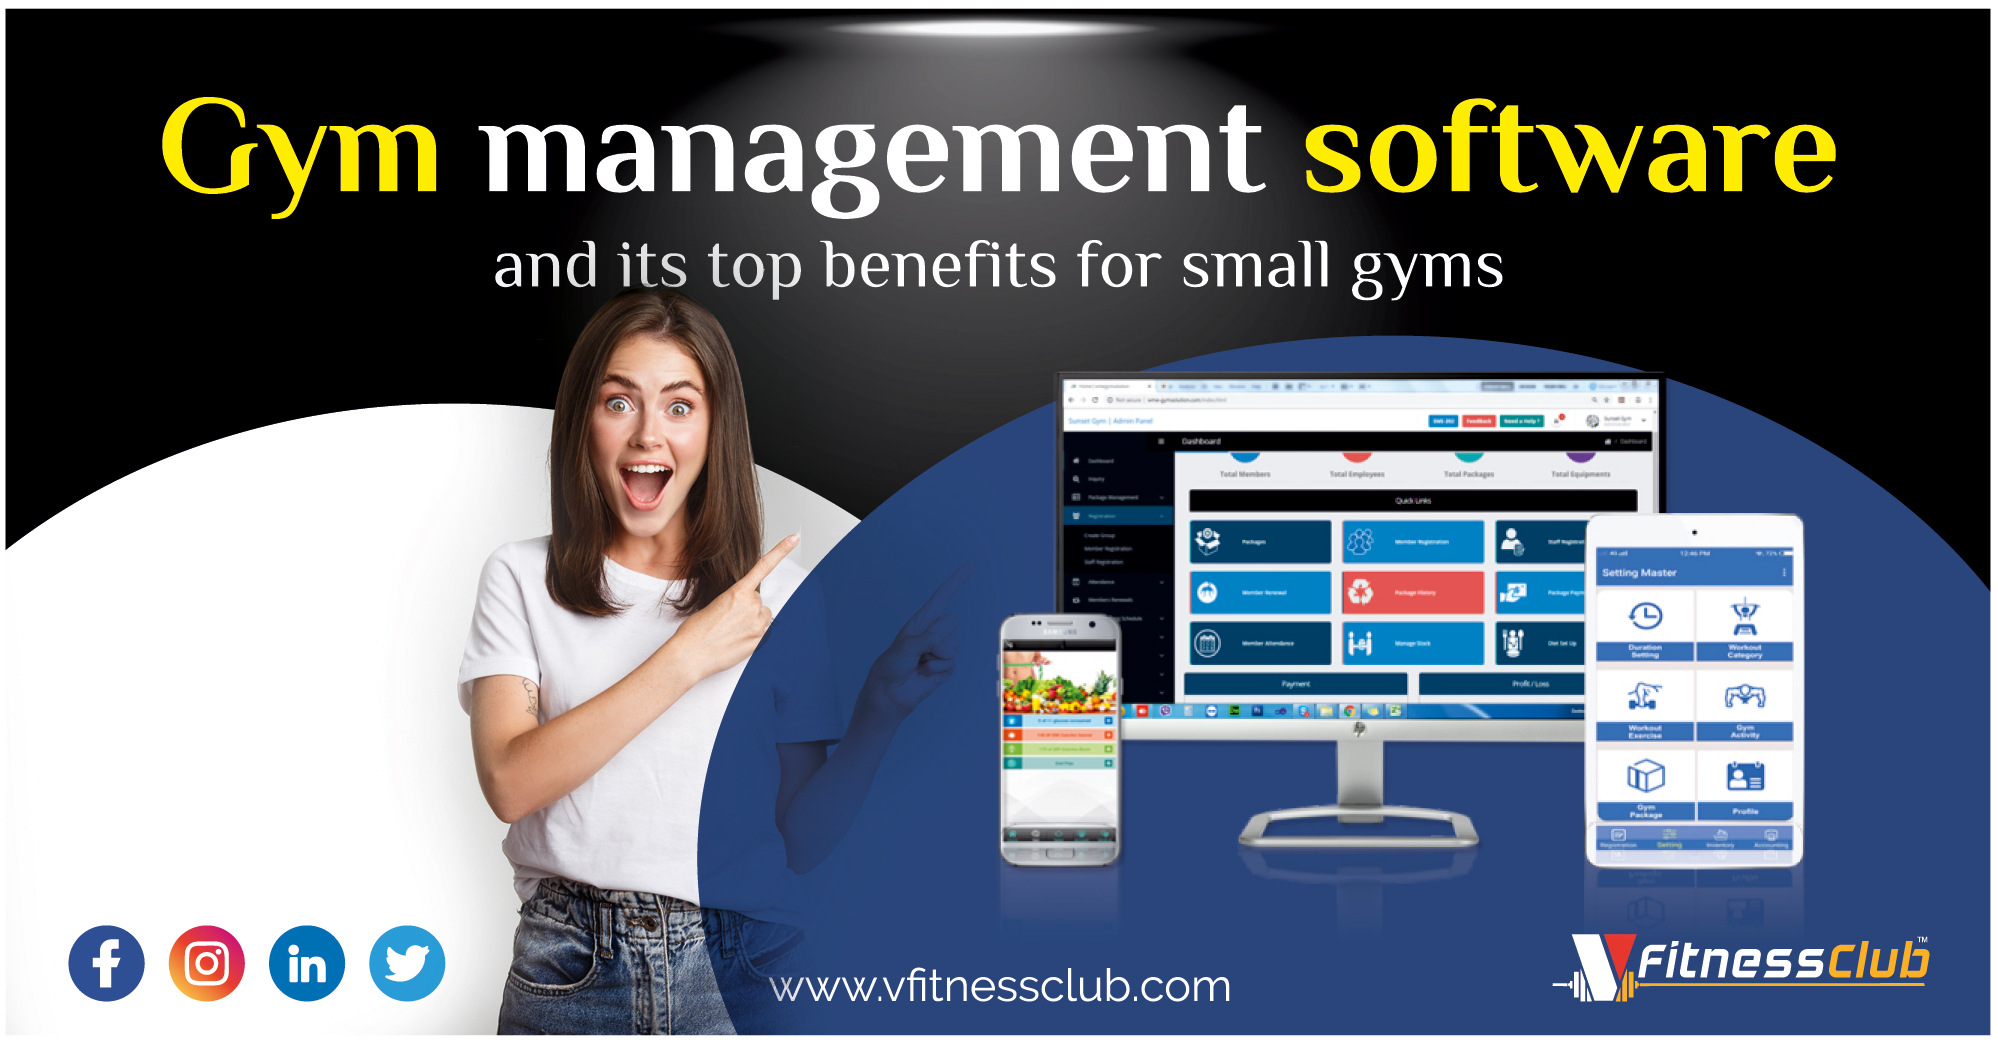 Gym Management Software and its Top Benefits for Small Gyms